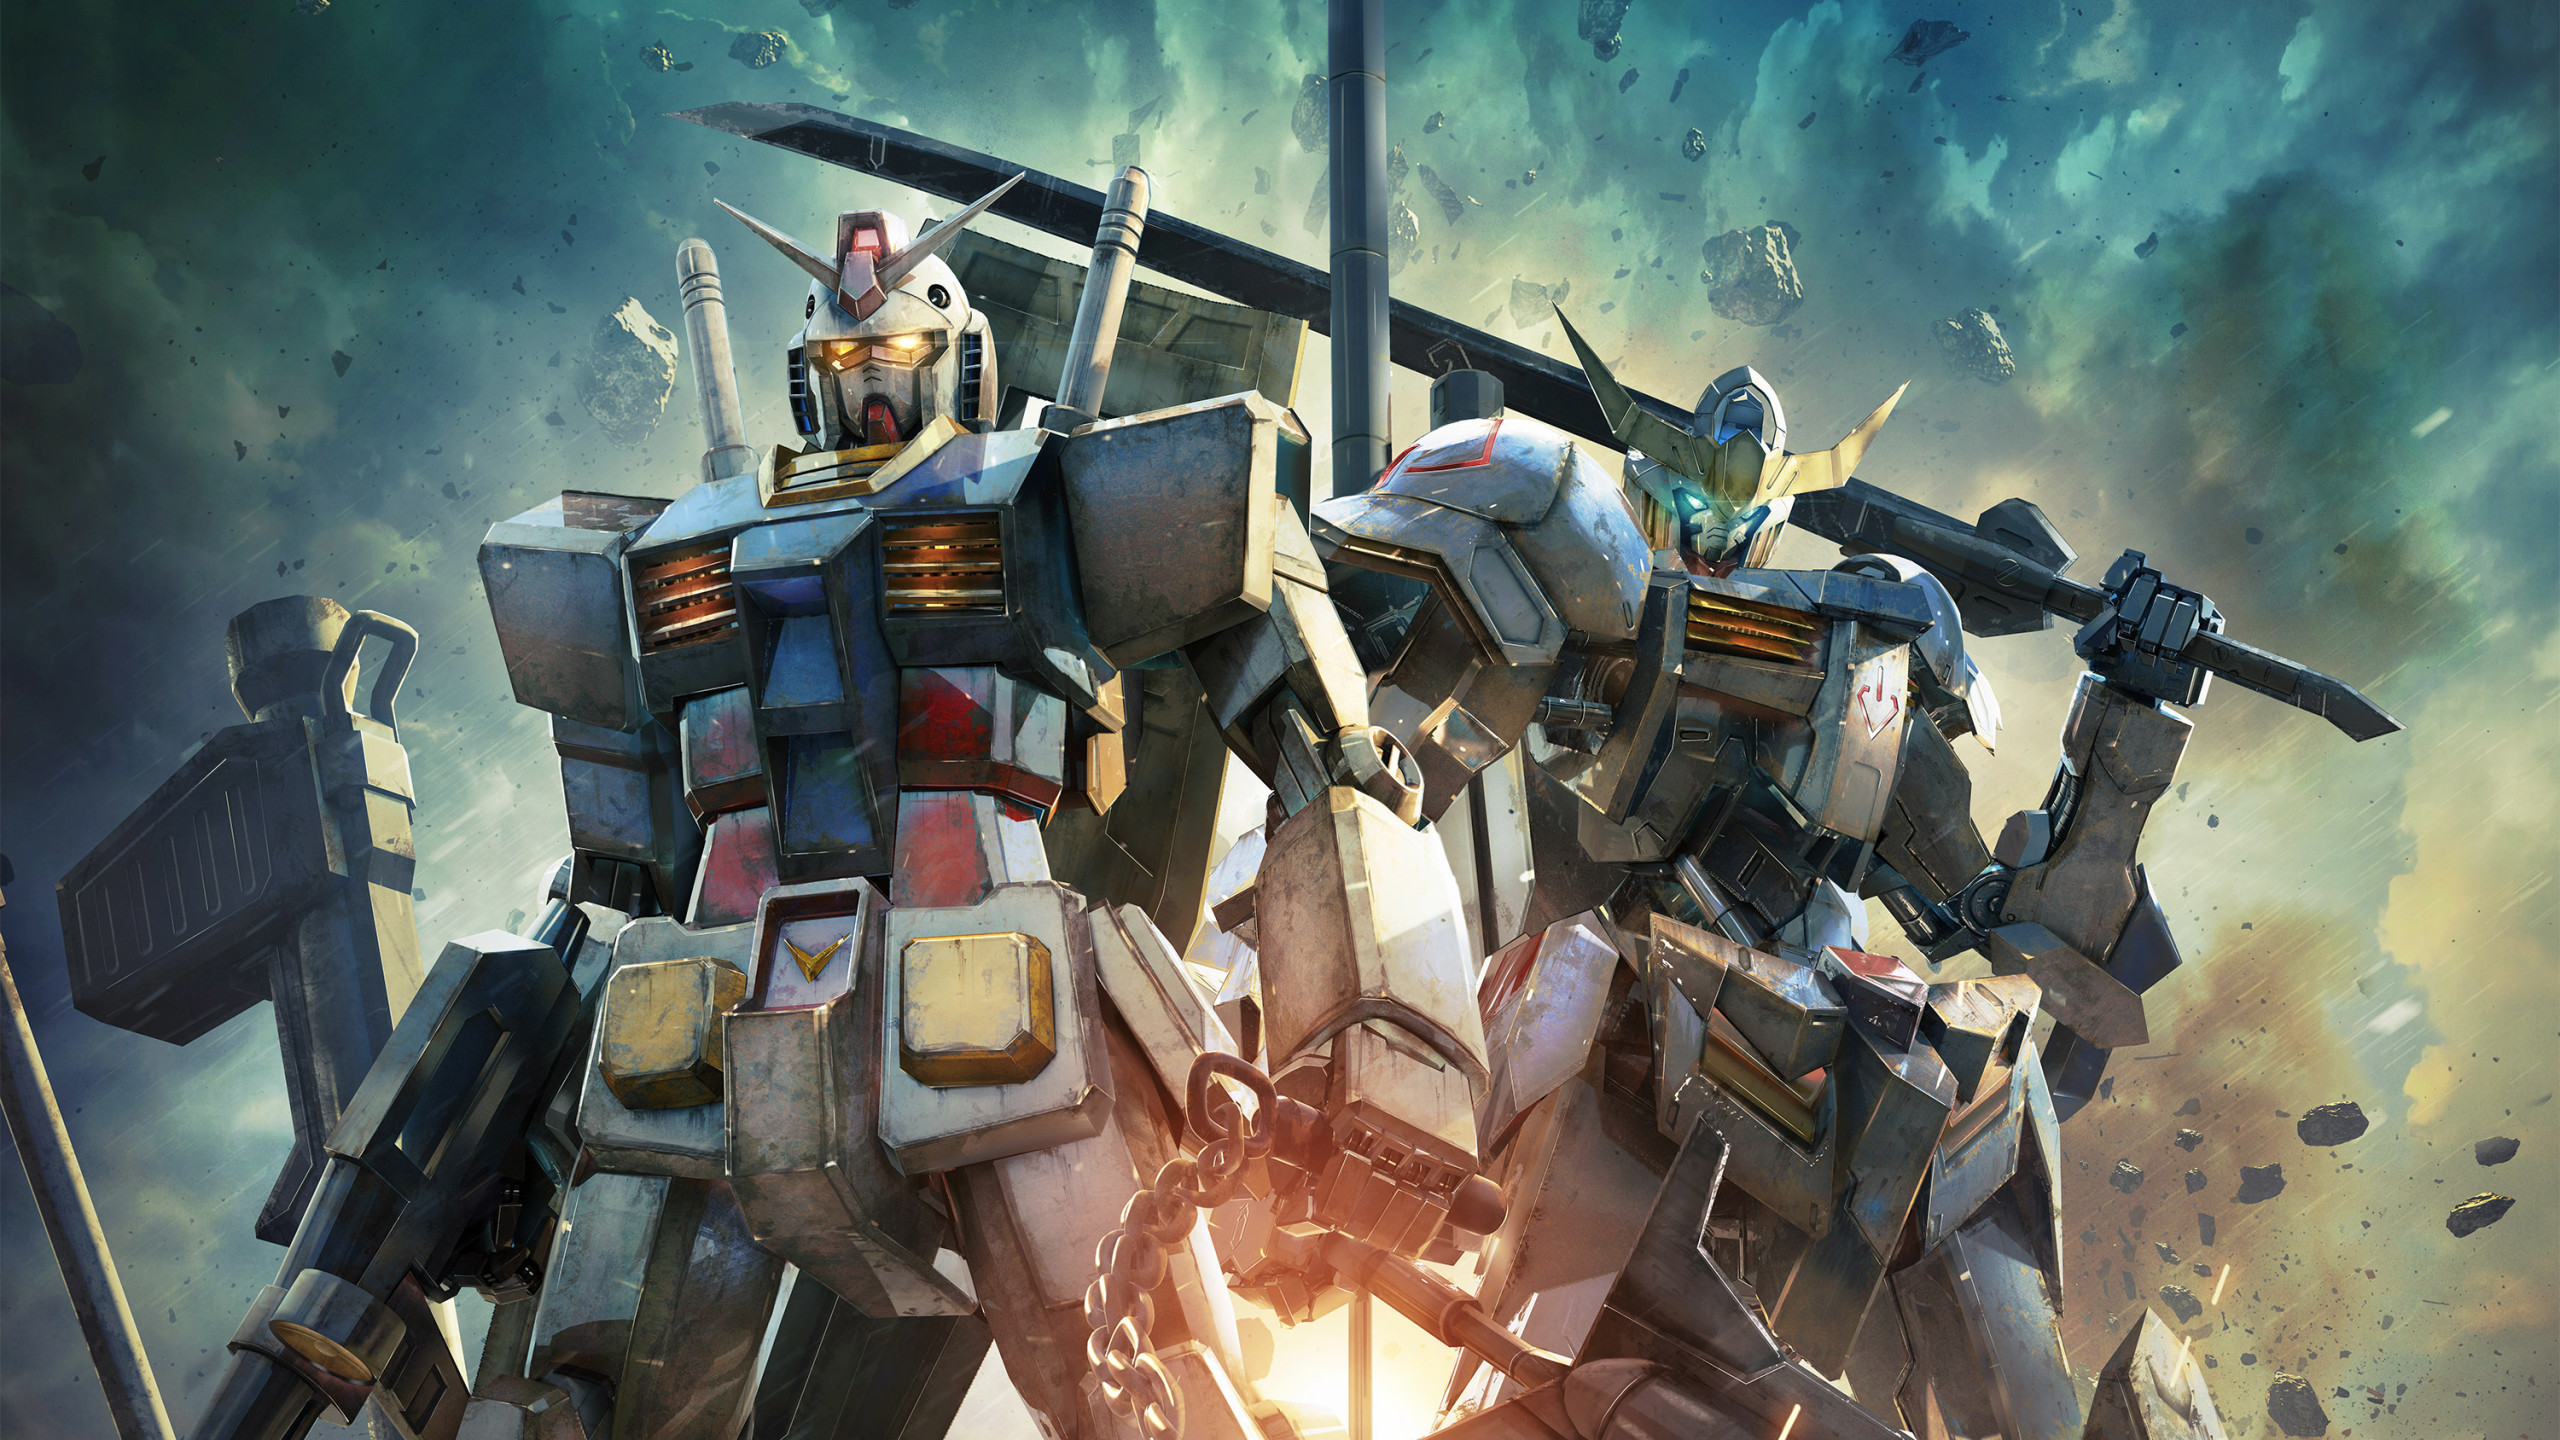 gundam wallpaper,action adventure game,strategy video game,pc game,mecha,games